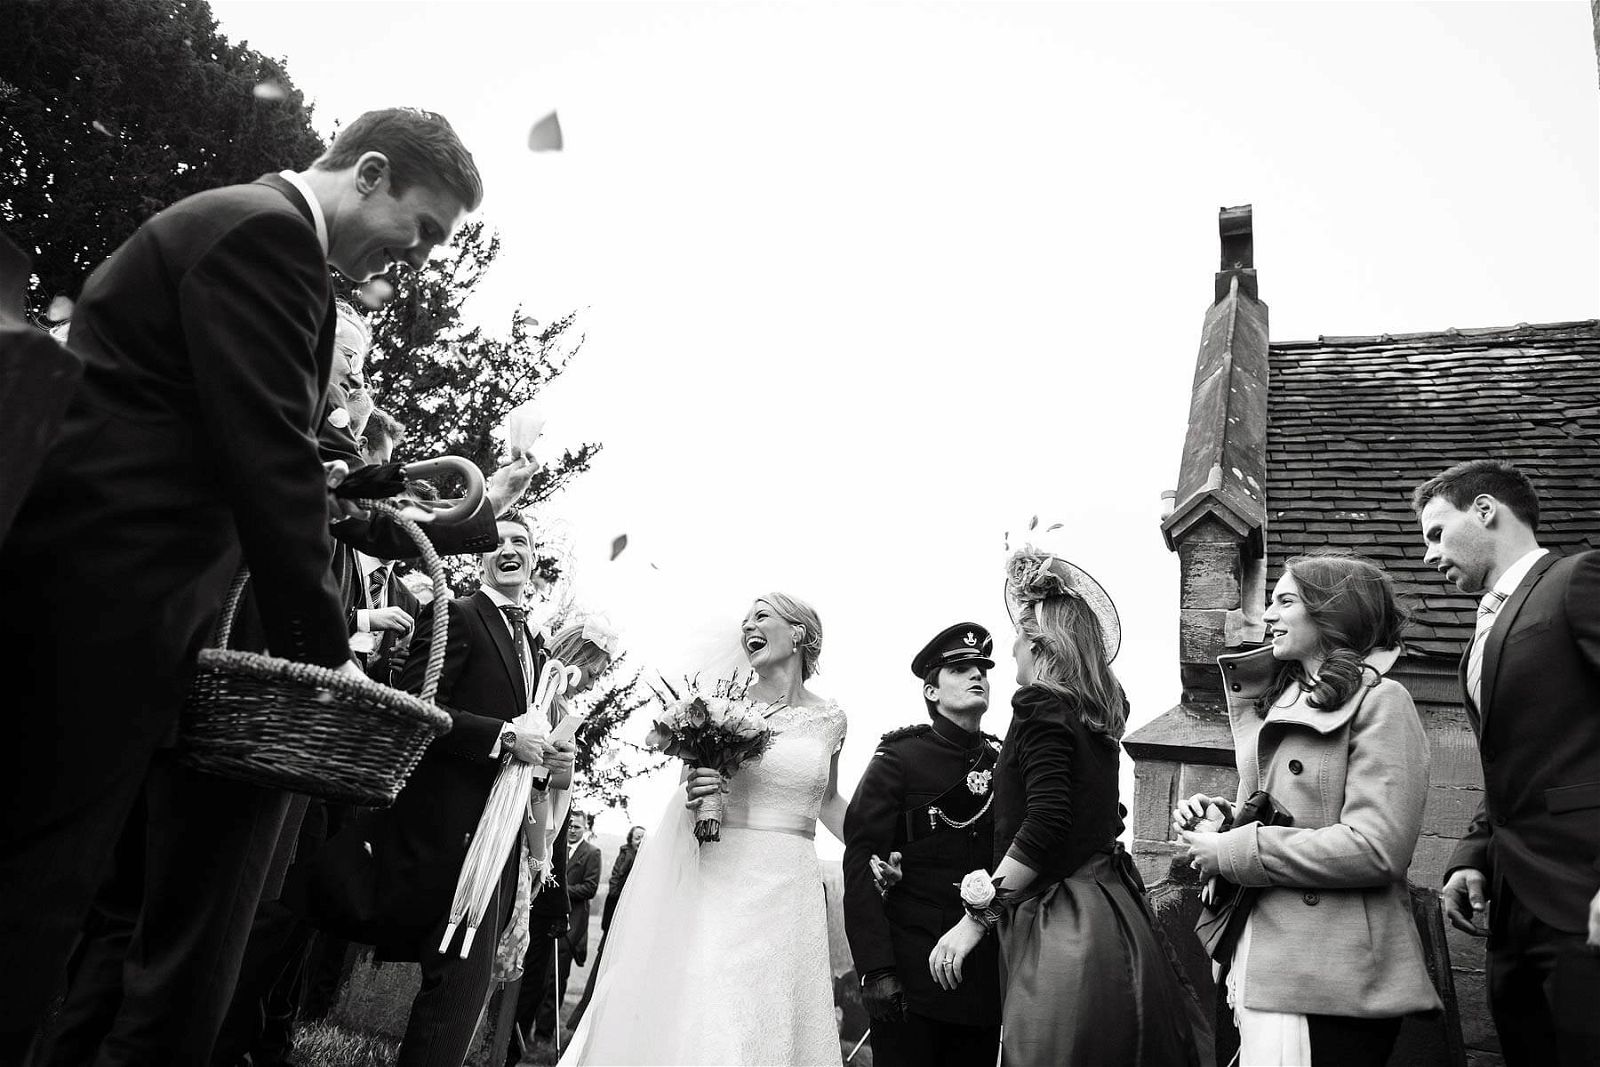 Fabulous emotions and expressions captured in this wonderful reportage photograph as the bride and groom leave the church at Sandon Hall in Stafford by Documentary Wedding Photographer Stuart James